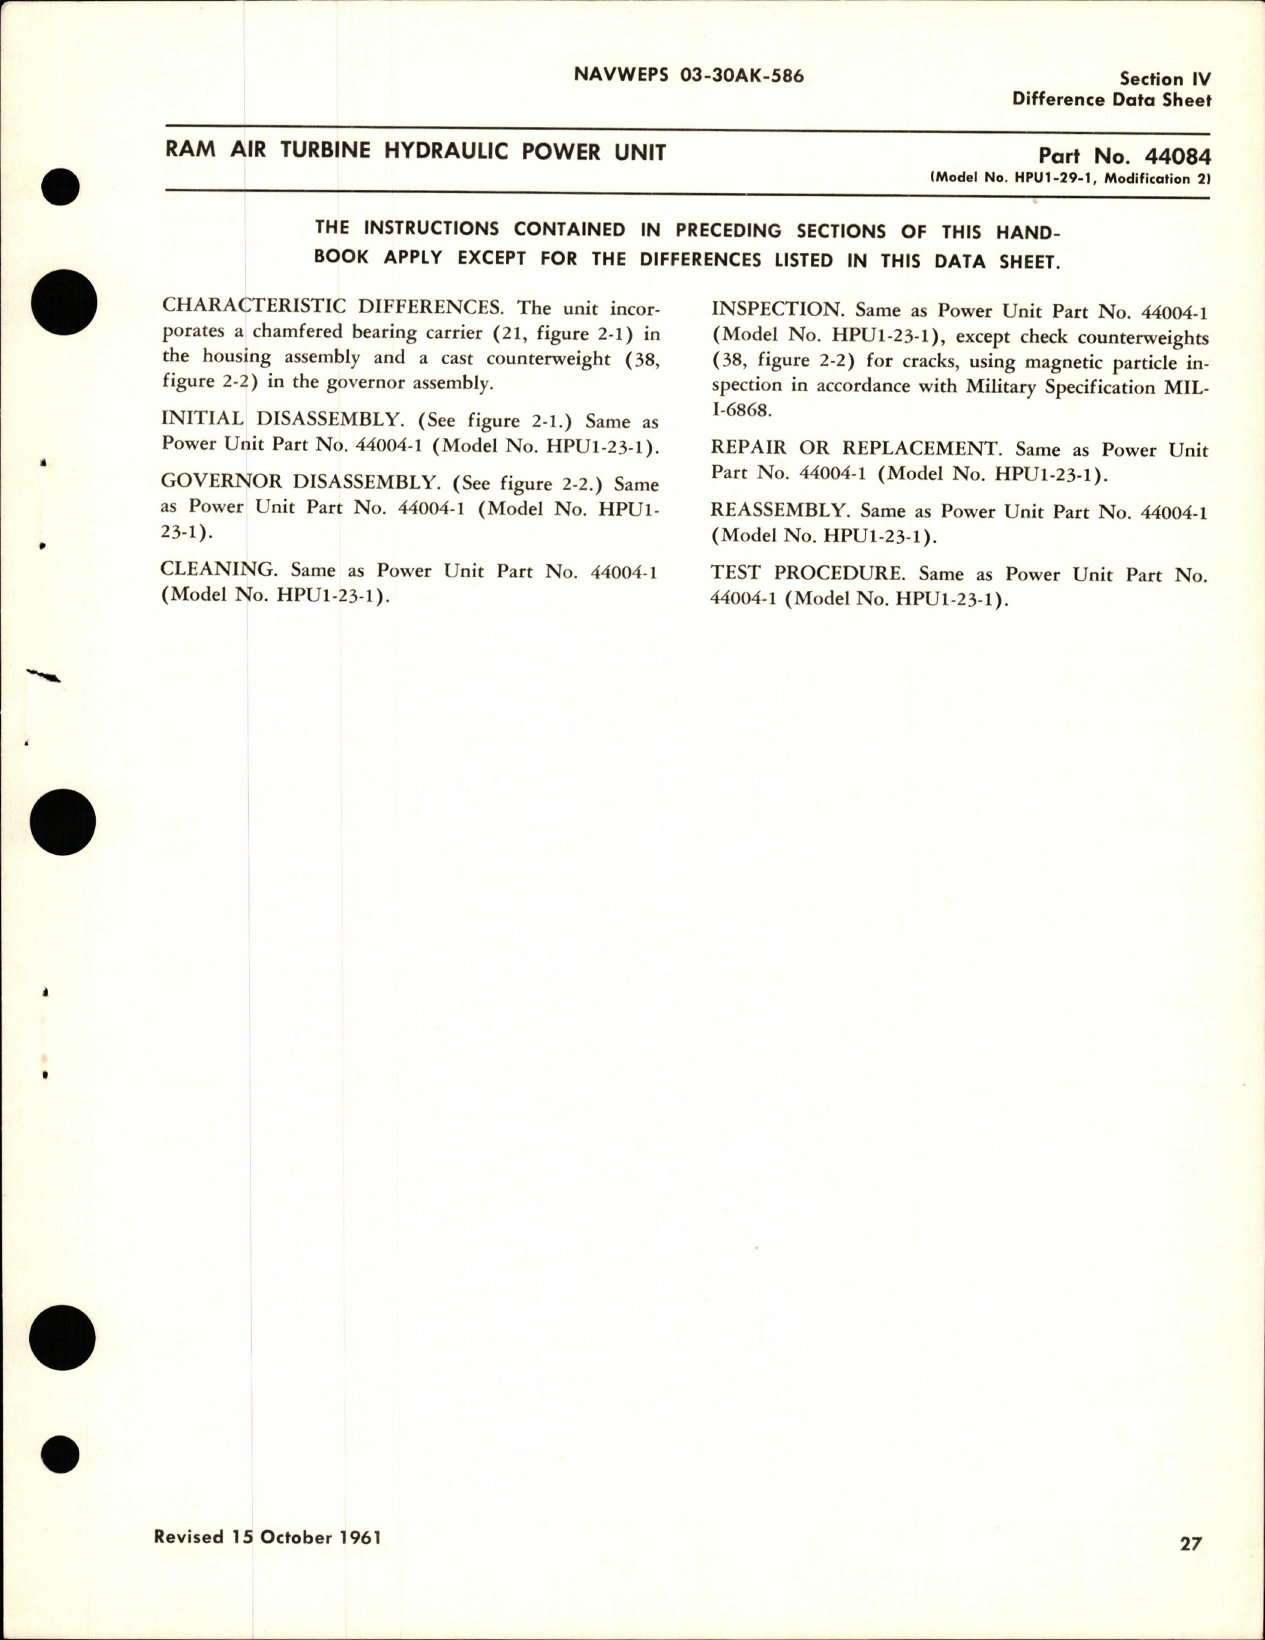 Sample page 5 from AirCorps Library document: Overhaul Instructions for Ram Air Turbine Hydraulic Power Units - Parts 44004-1, 44084, 44084-1, and 44140 